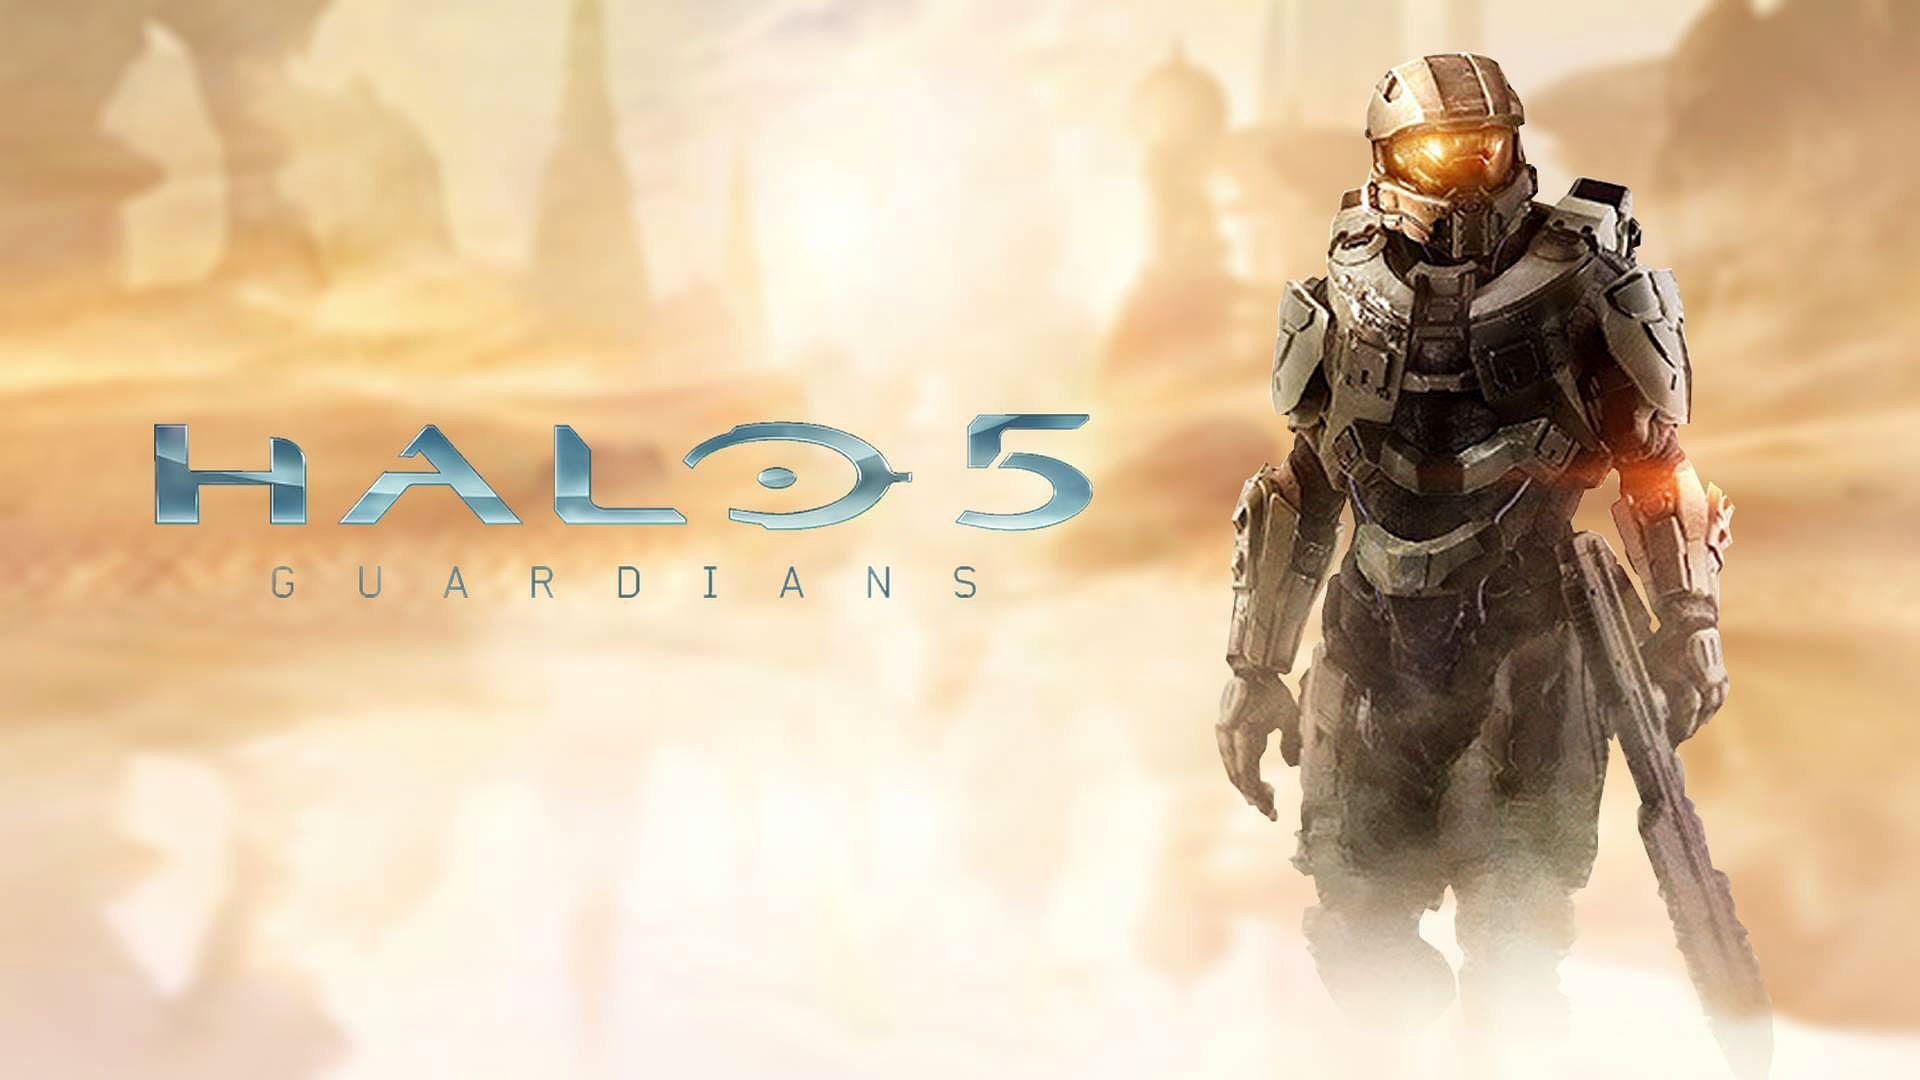 Free download Halo 5 1920x1080 for your Desktop Mobile  Tablet   Explore 37 Download Halo 5 Wallpaper  Halo 5 Wallpaper Halo 5 Guardians  Wallpaper Halo 5 4K Wallpaper